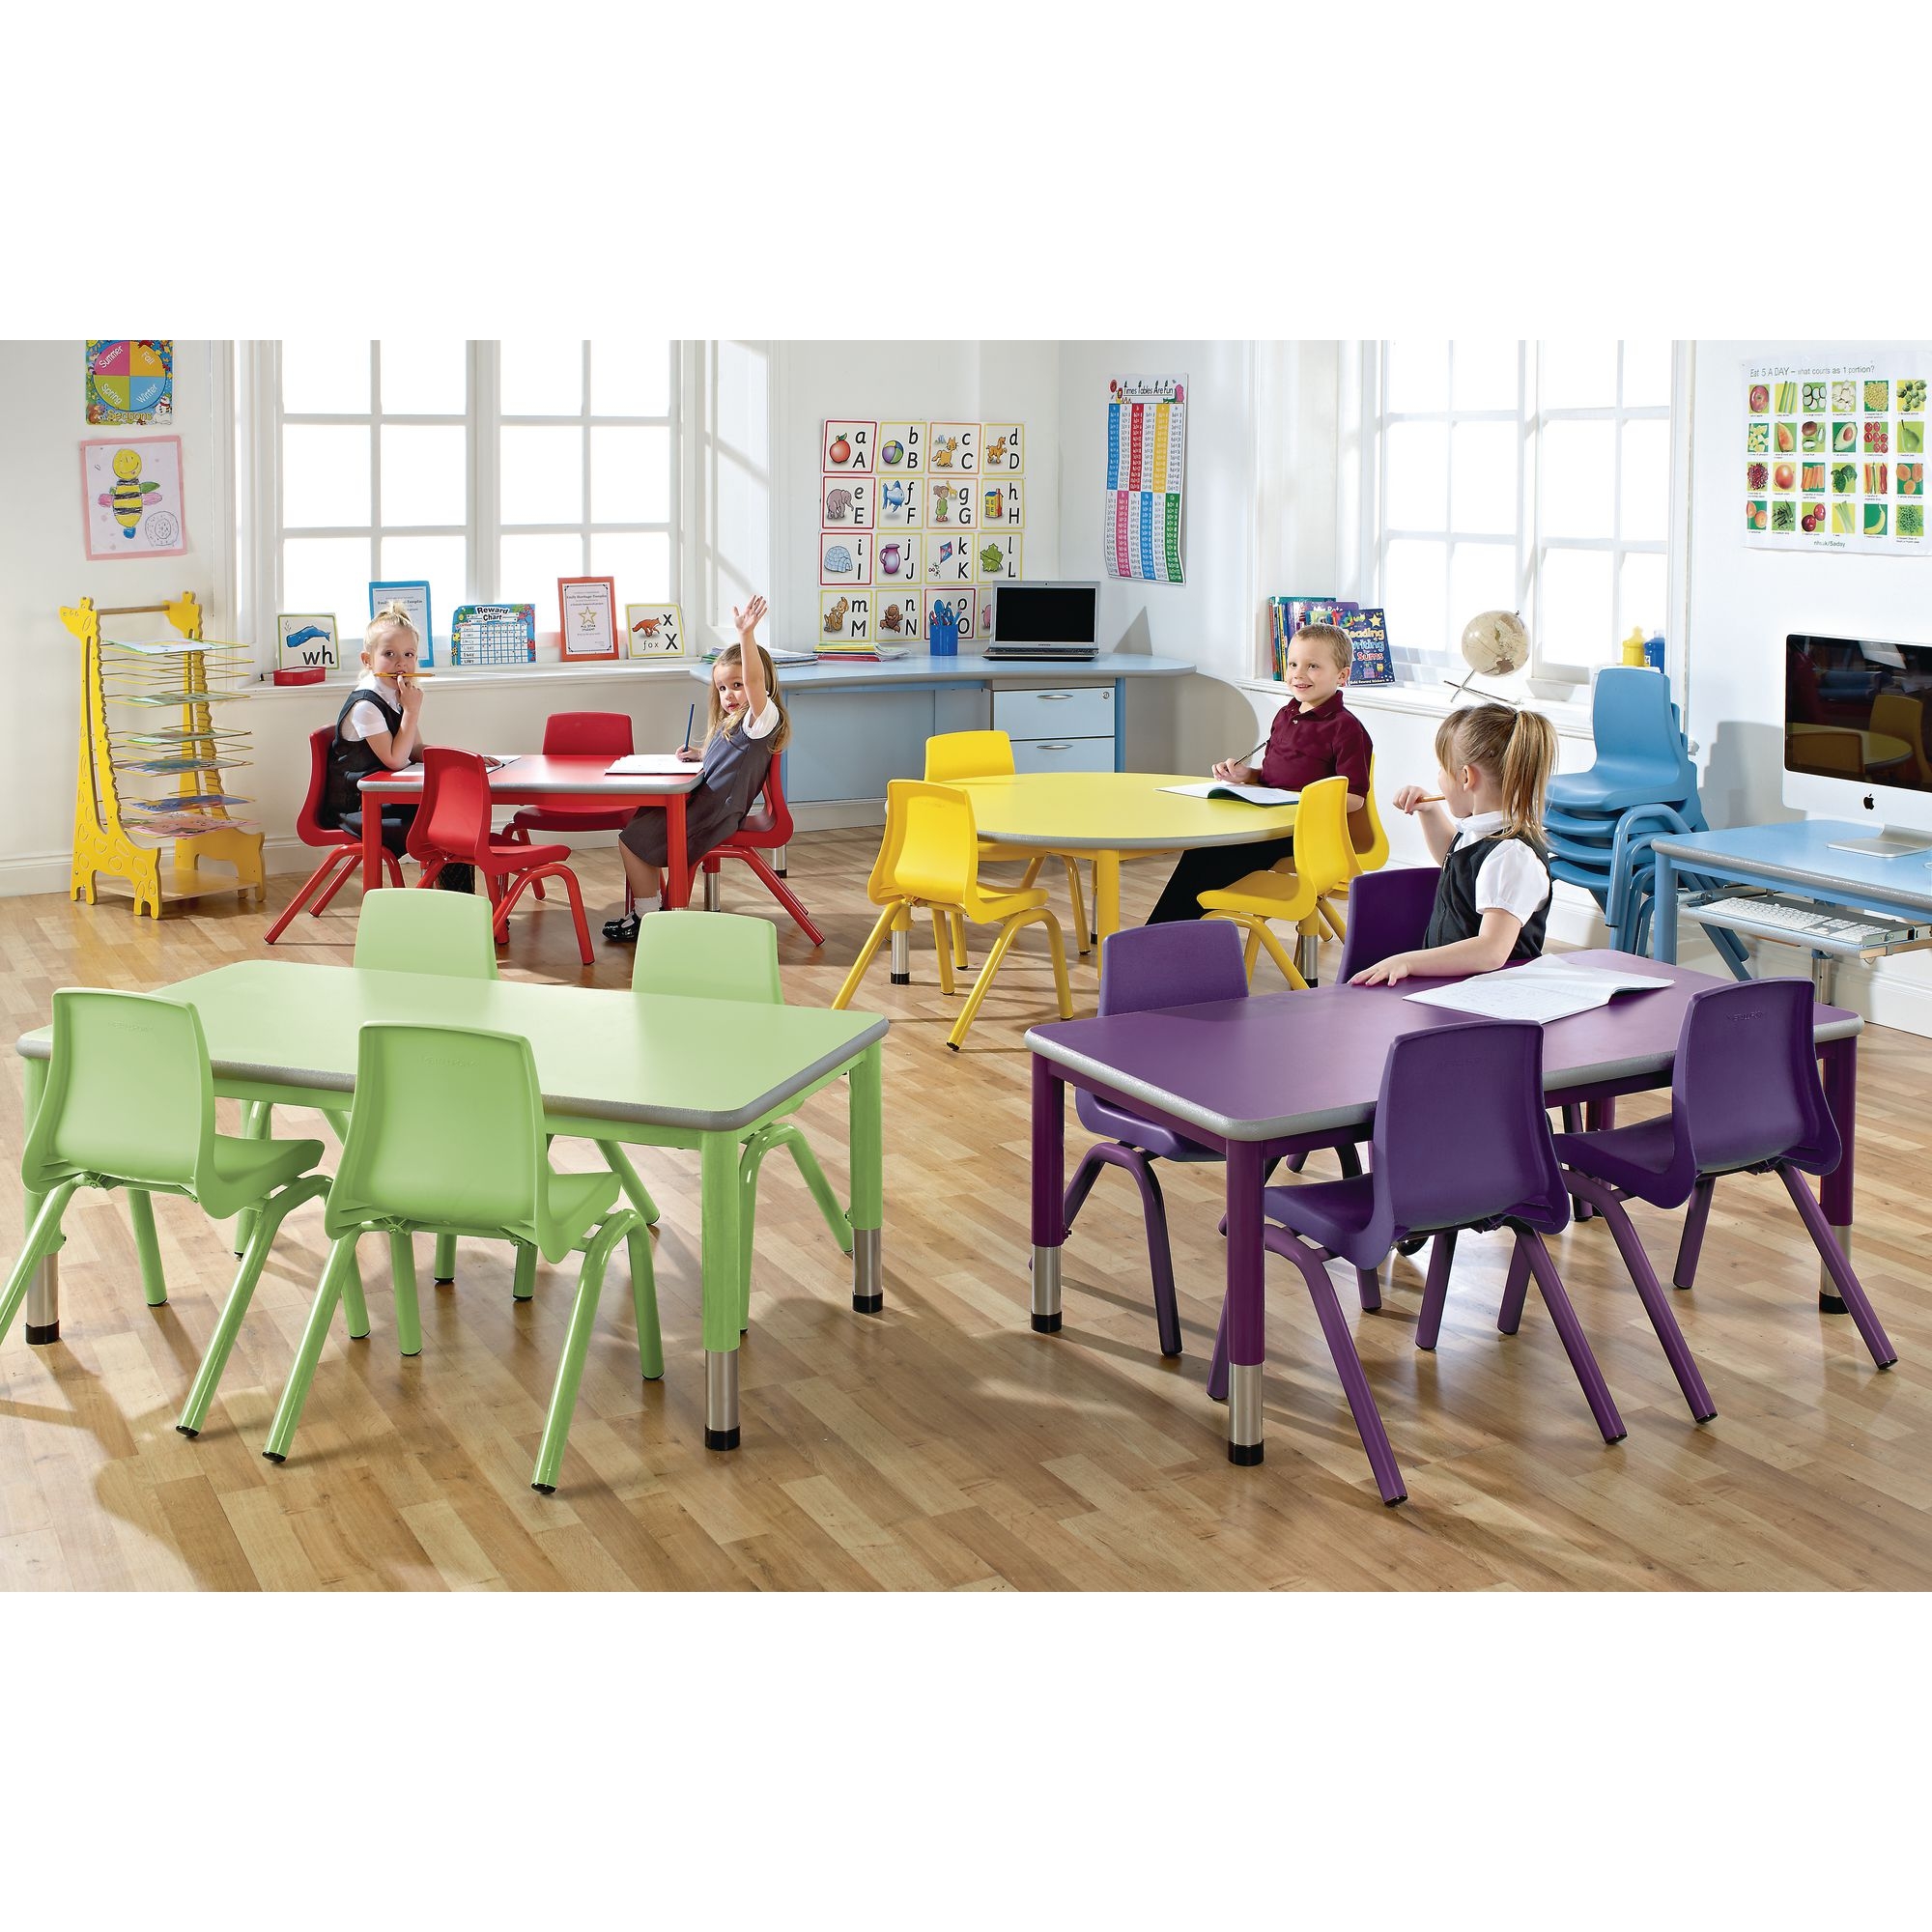 Harlequin Rectangular Height Adjustable Steel Classroom Pack: Table and 4 Chairs - 900 x 600 x 400mm - Purple